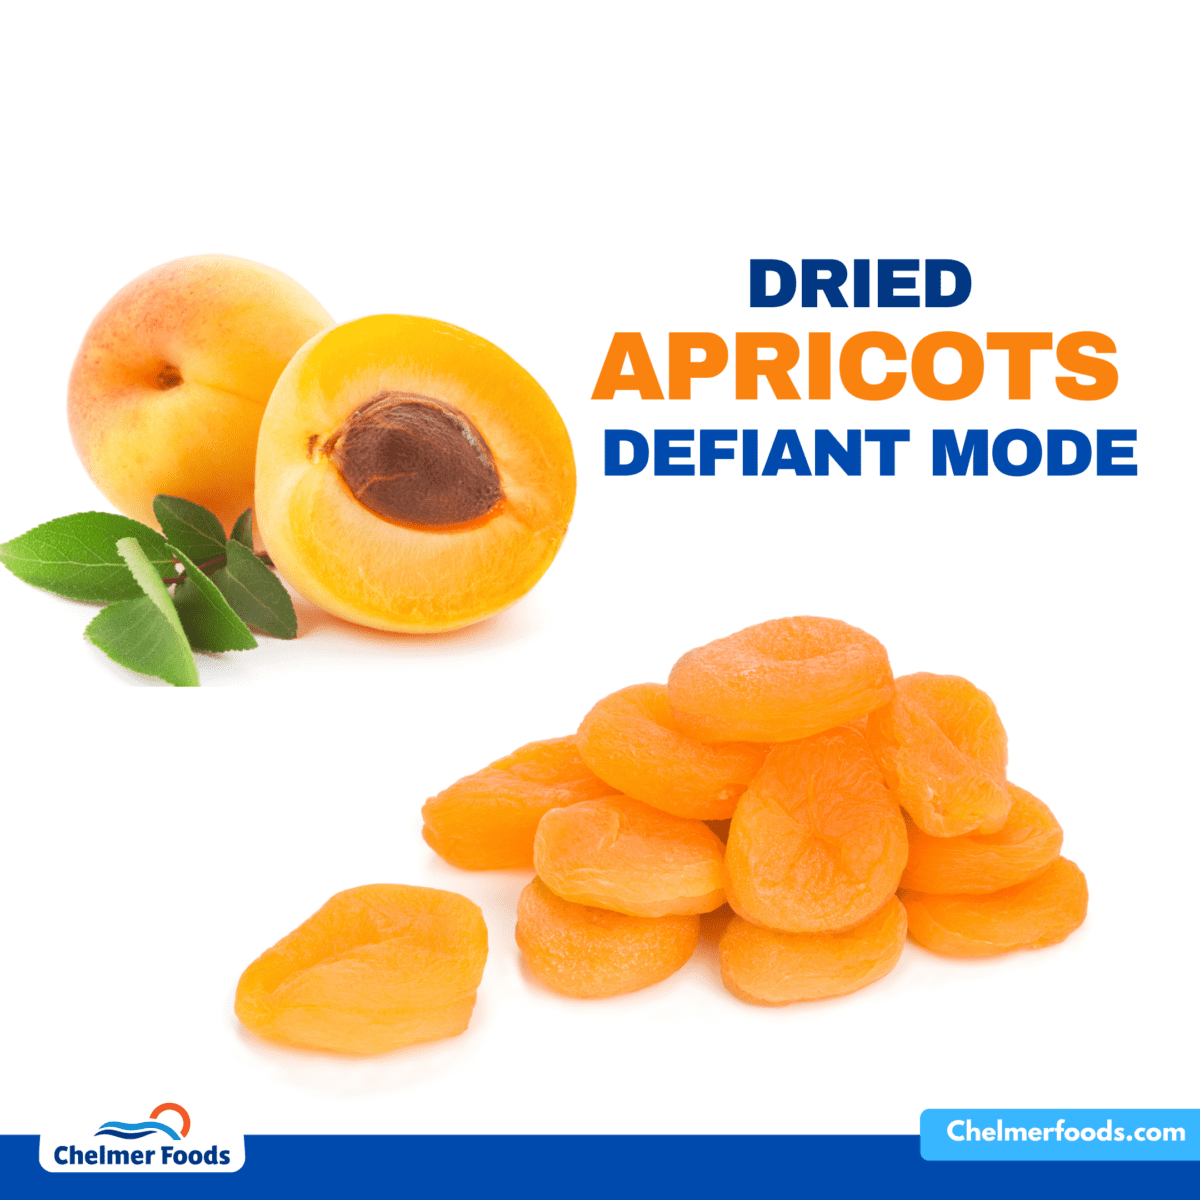 Dried apricots, market update